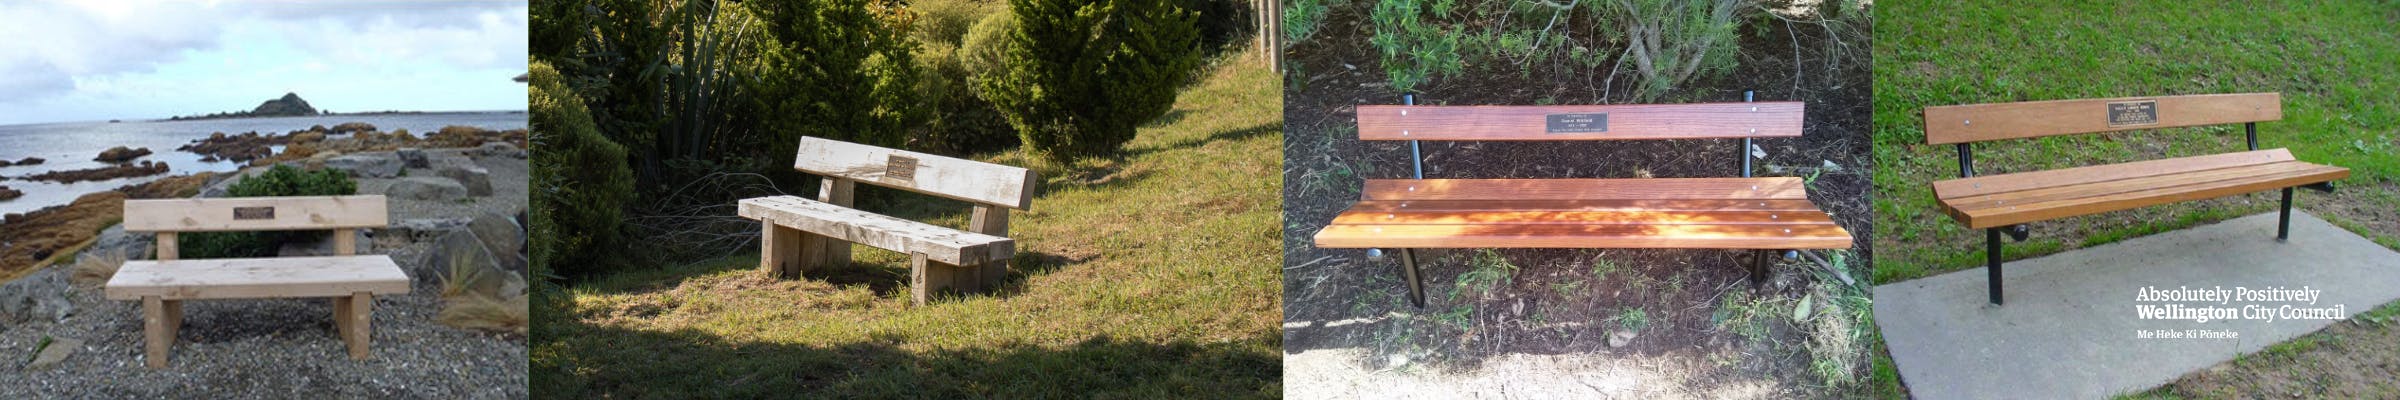 Four images of memorial benches in different parks and reserves in Wellington